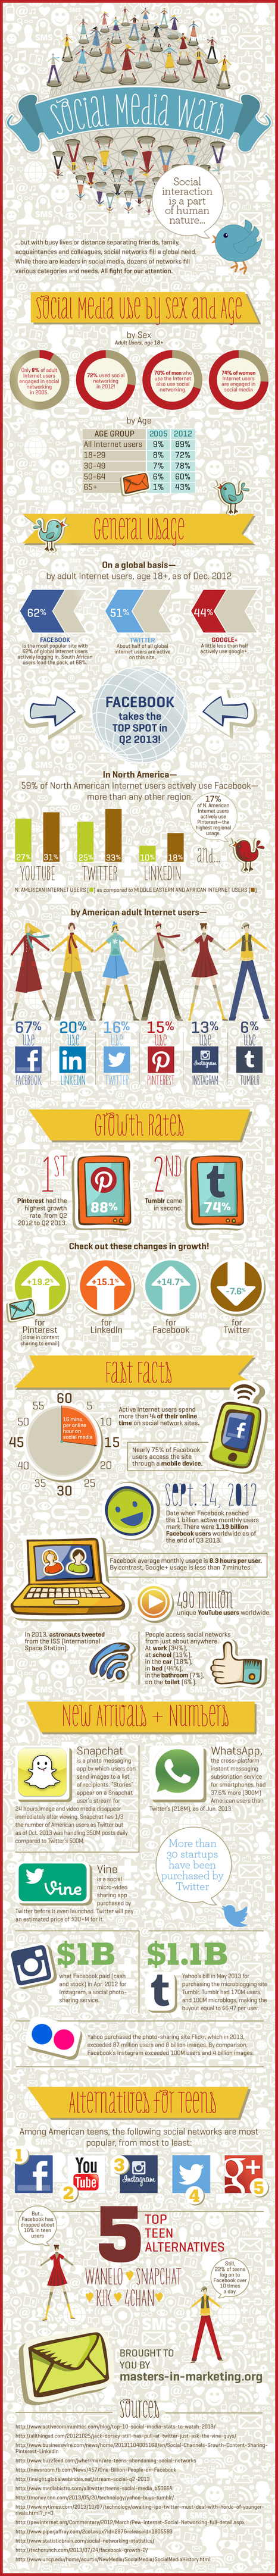 The Social Media Wars [INFOGRAPHIC] | Design, Science and Technology | Scoop.it